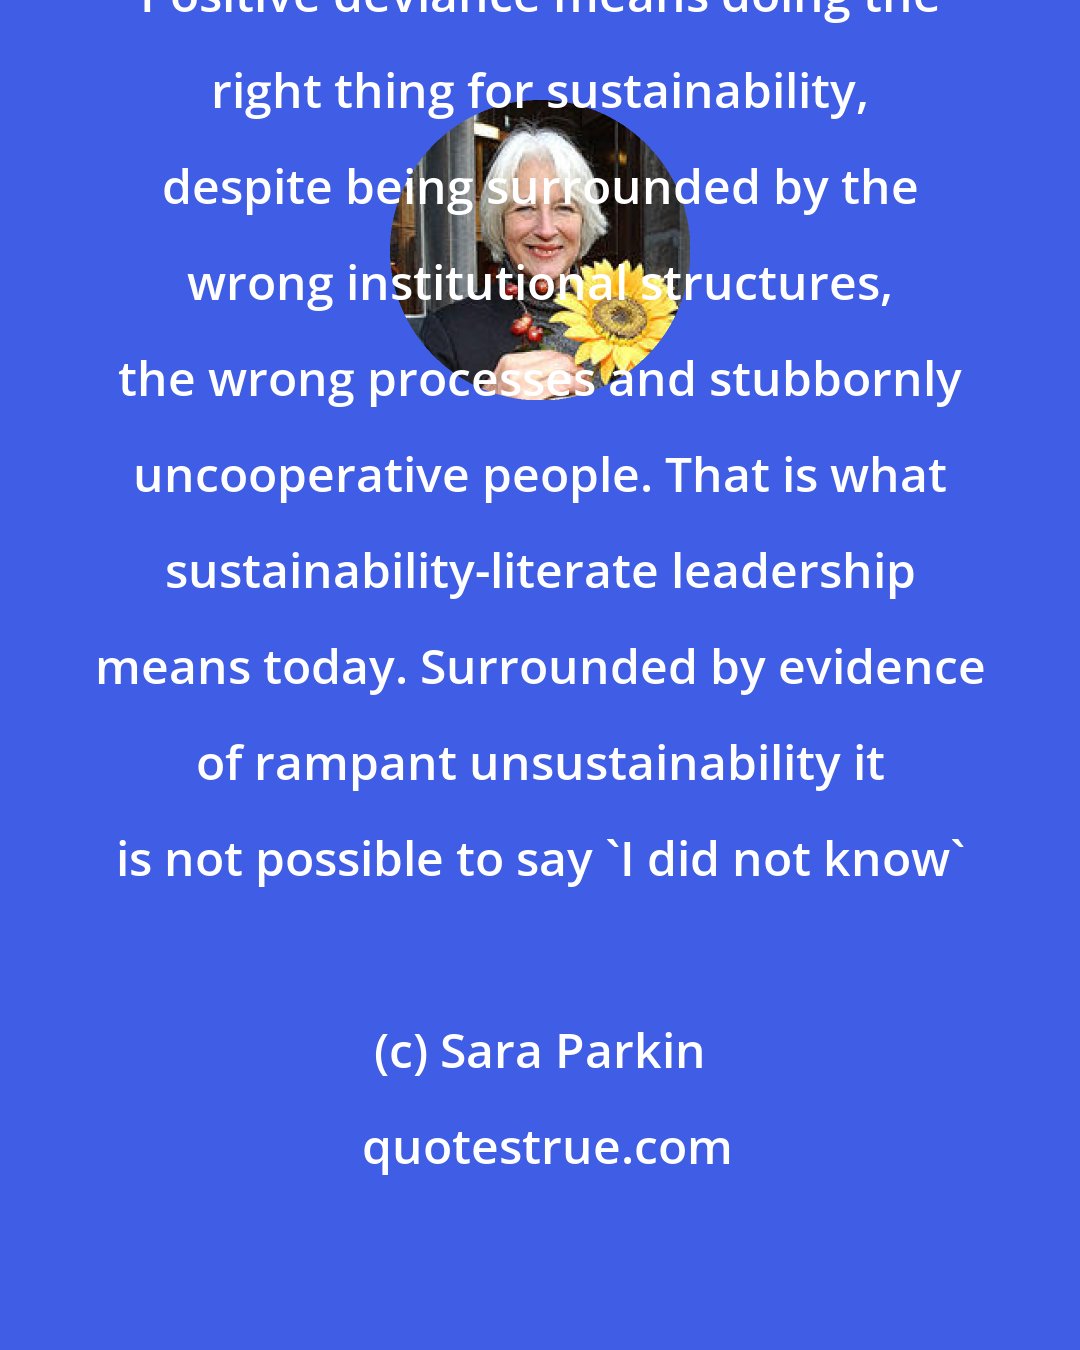 Sara Parkin: Positive deviance means doing the right thing for sustainability, despite being surrounded by the wrong institutional structures, the wrong processes and stubbornly uncooperative people. That is what sustainability-literate leadership means today. Surrounded by evidence of rampant unsustainability it is not possible to say 'I did not know'